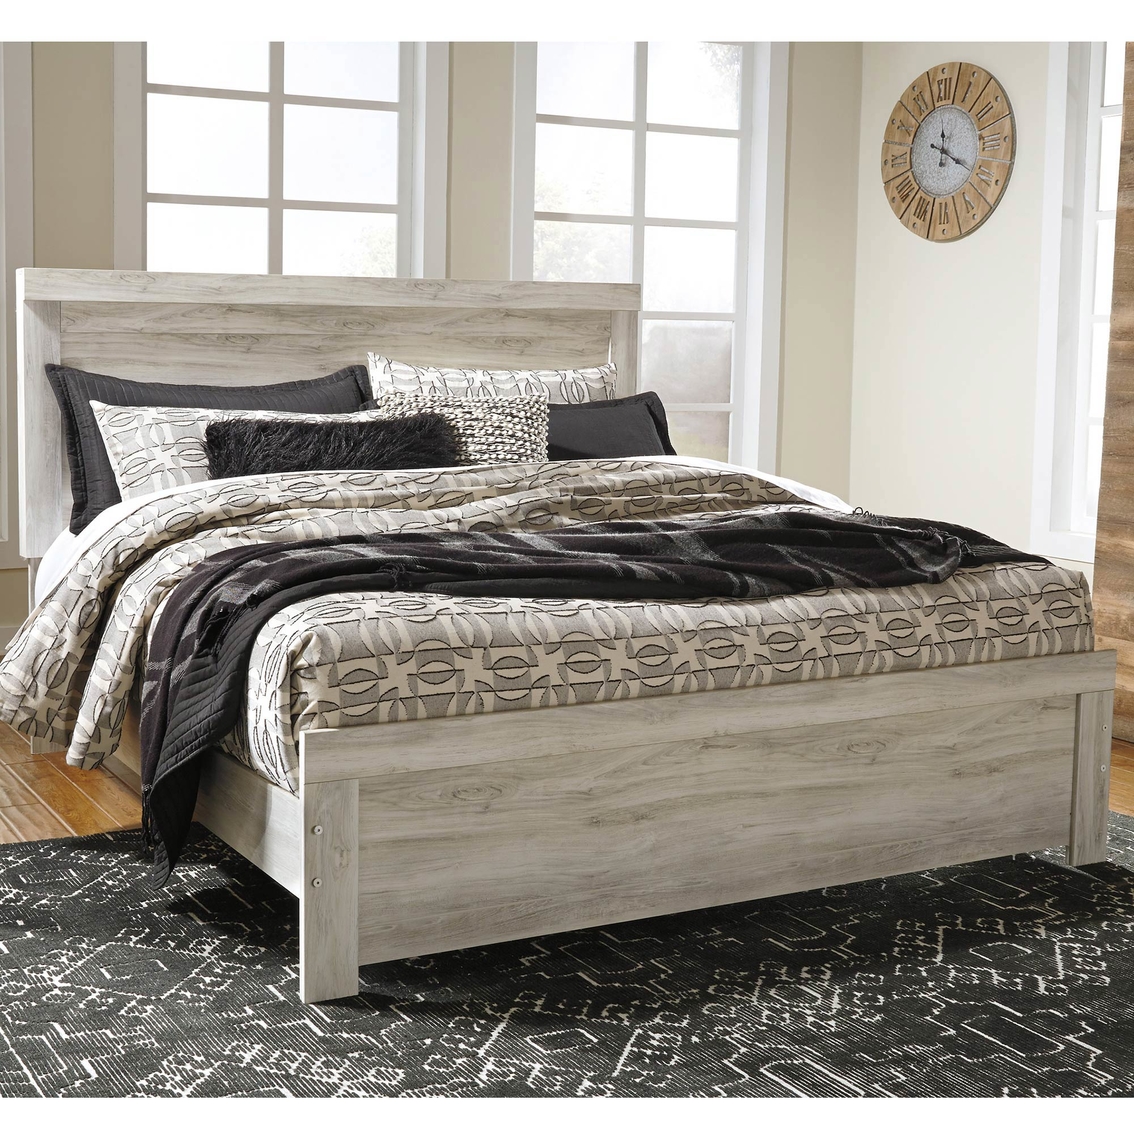 Signature Design by Ashley Bellaby Panel Bed - Image 2 of 4